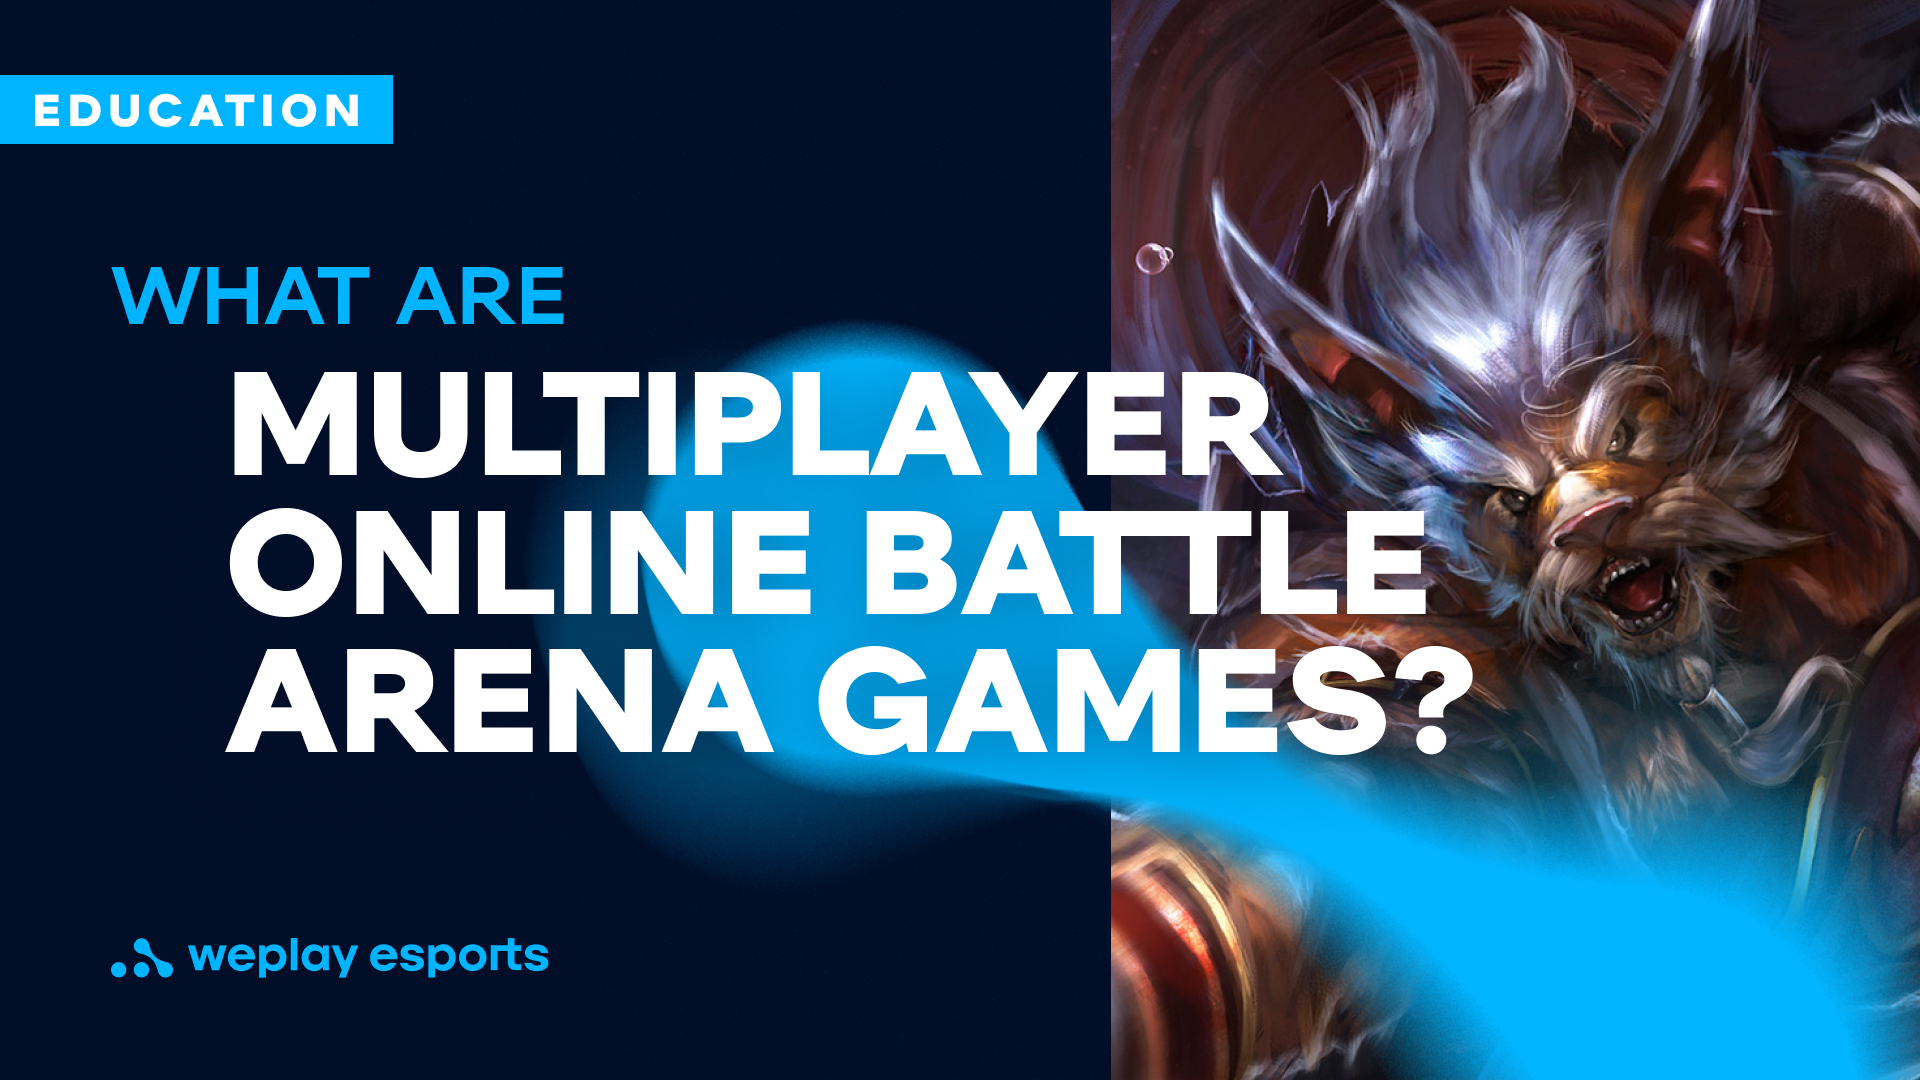 What are multiplayer online battle arena games?